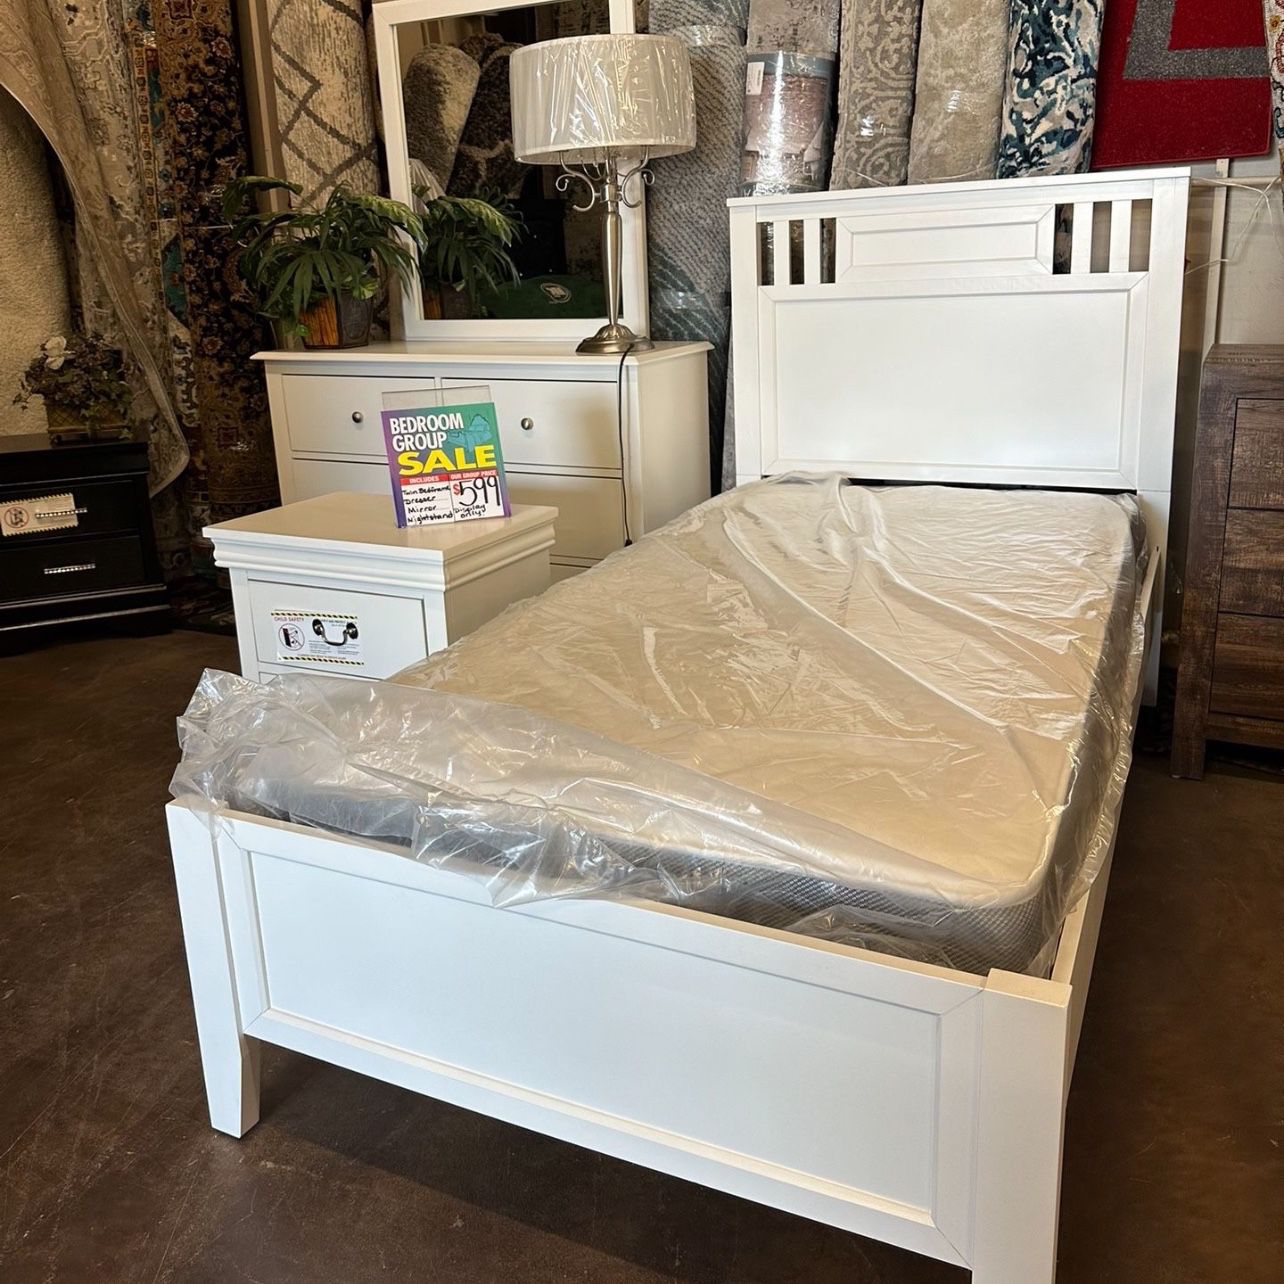 4 Pc Twin Or Full Bedroom Set On Sale Now Only $549